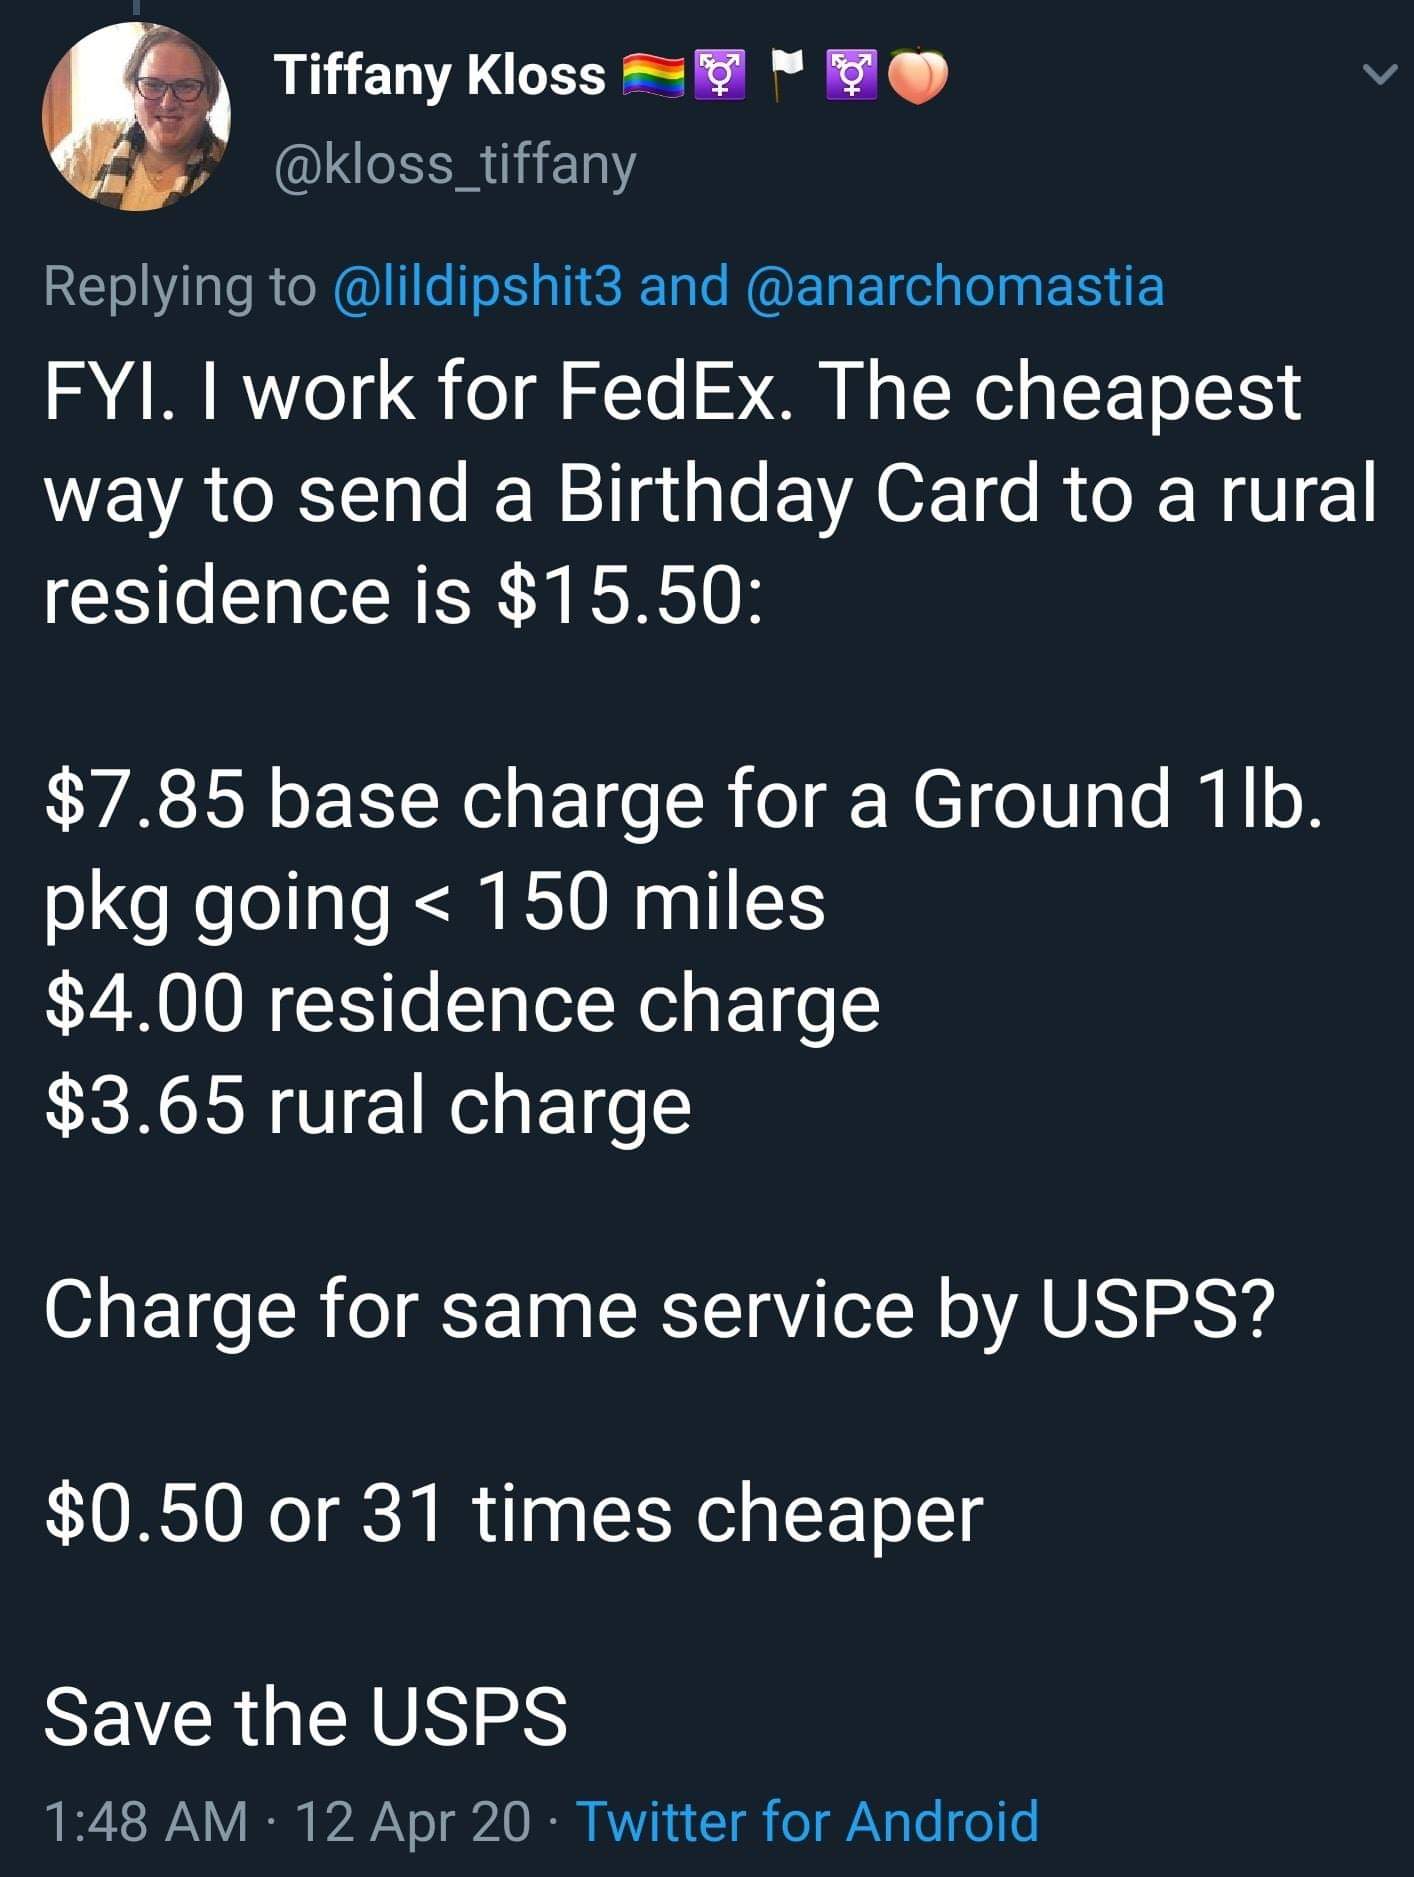 Or maybe, and hear me out, USPS should charge more?